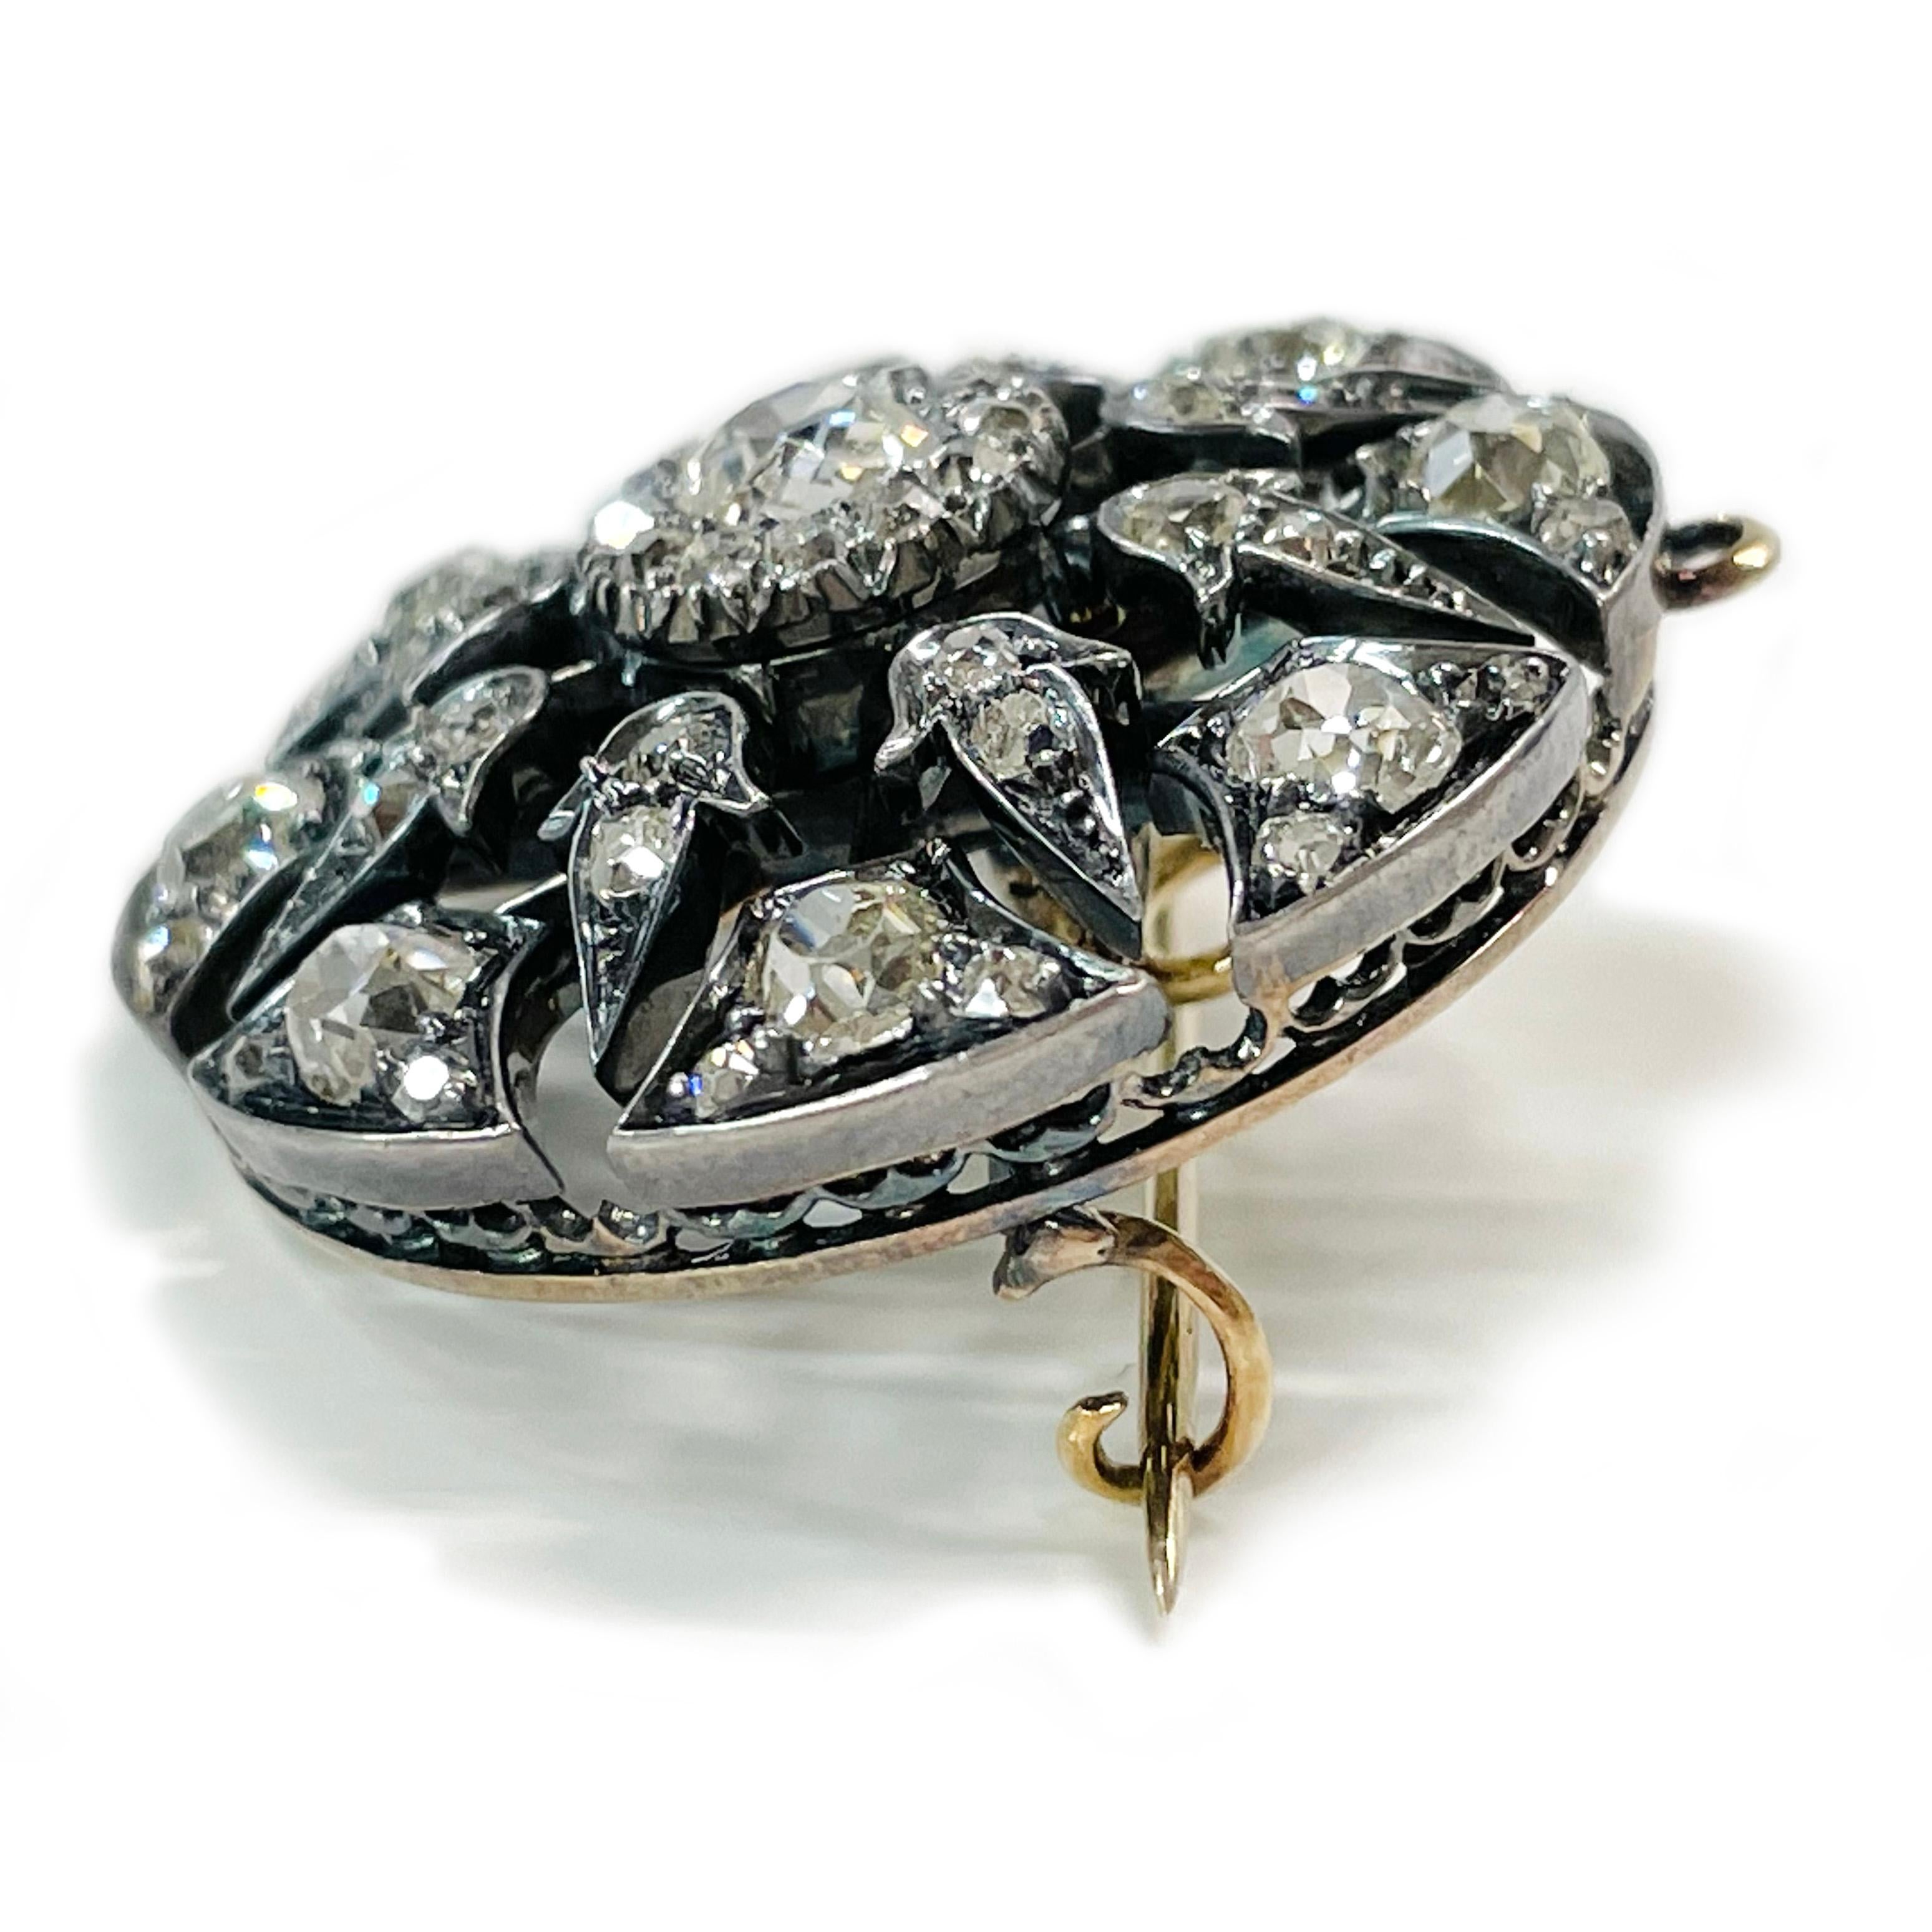 Antique Victorian (circa 1850s) Sterling Silver 14 Karat Yellow Gold Euro-Cut Diamond Pendant Brooch. This is an absolutely gorgeous mourning pendant brooch with a total of fifty-three Euro-cut diamonds. There is one 5.1mm, eight 2.2mm, eight 3.8mm,